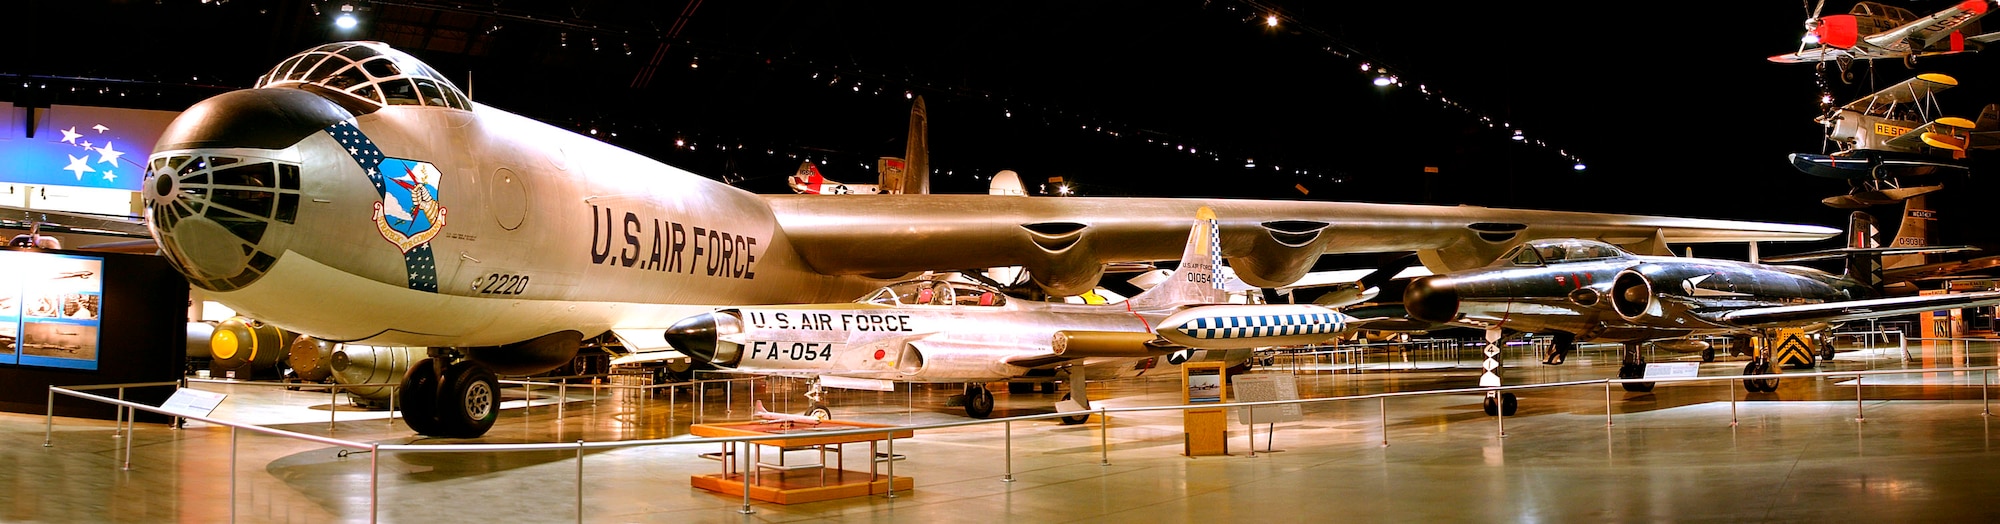 DAYTON, Ohio -- Convair B-36J Peacemaker in the Cold War Gallery at the National Museum of the United States Air Force. (U.S. Air Force photo by Ben Strasser)